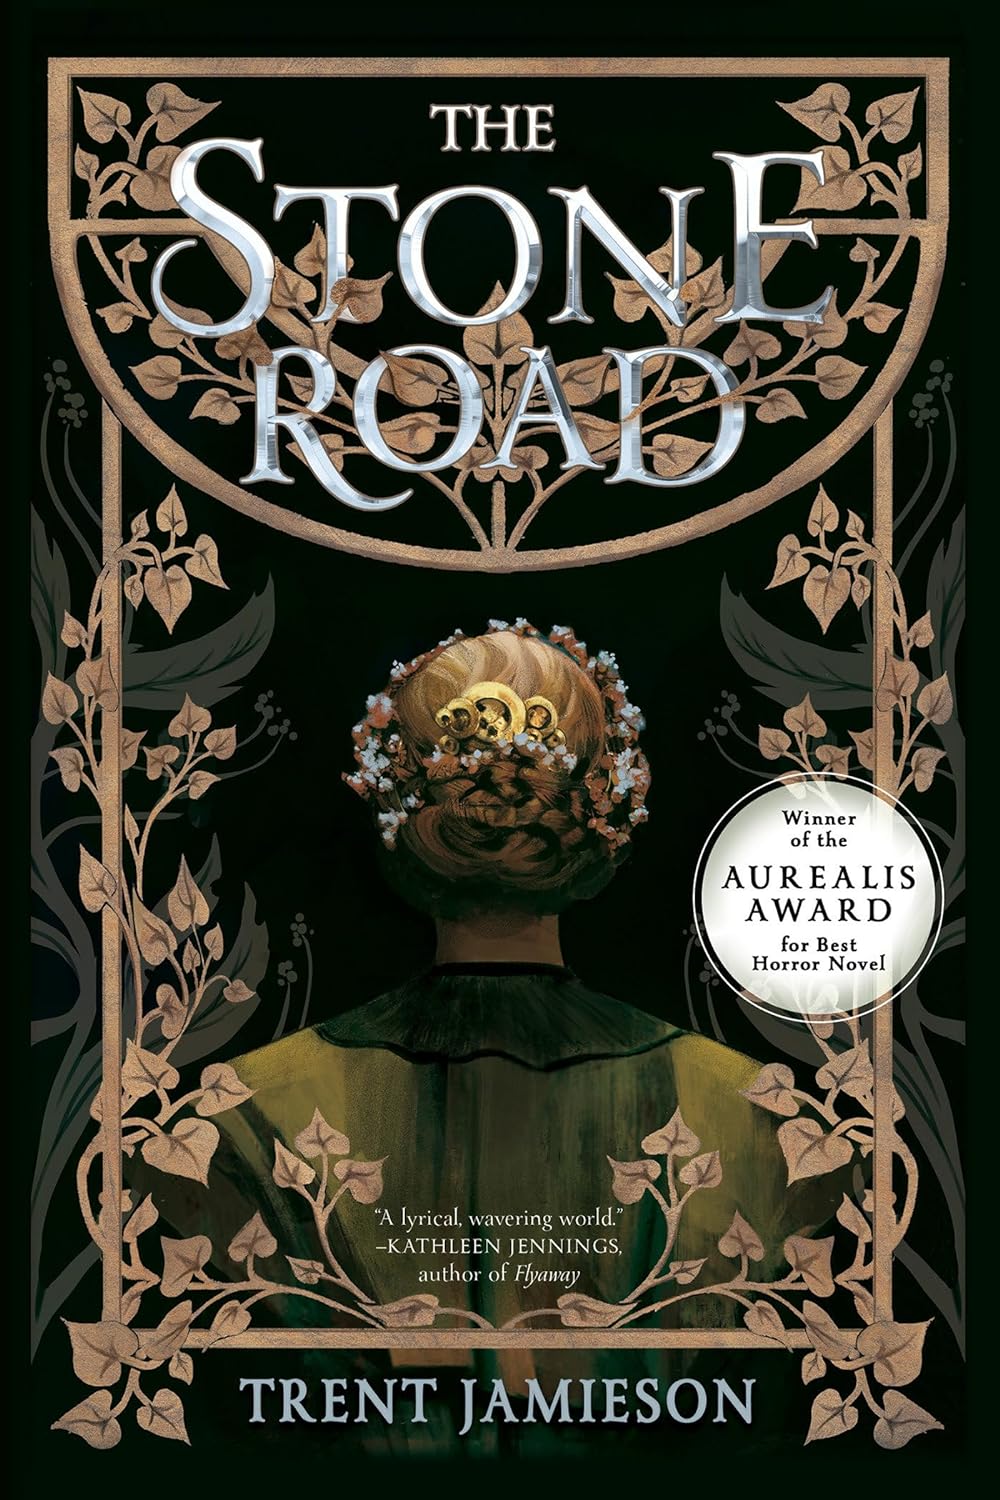 The Stone Road -Trent Jamieson - The Society for Unusual Books